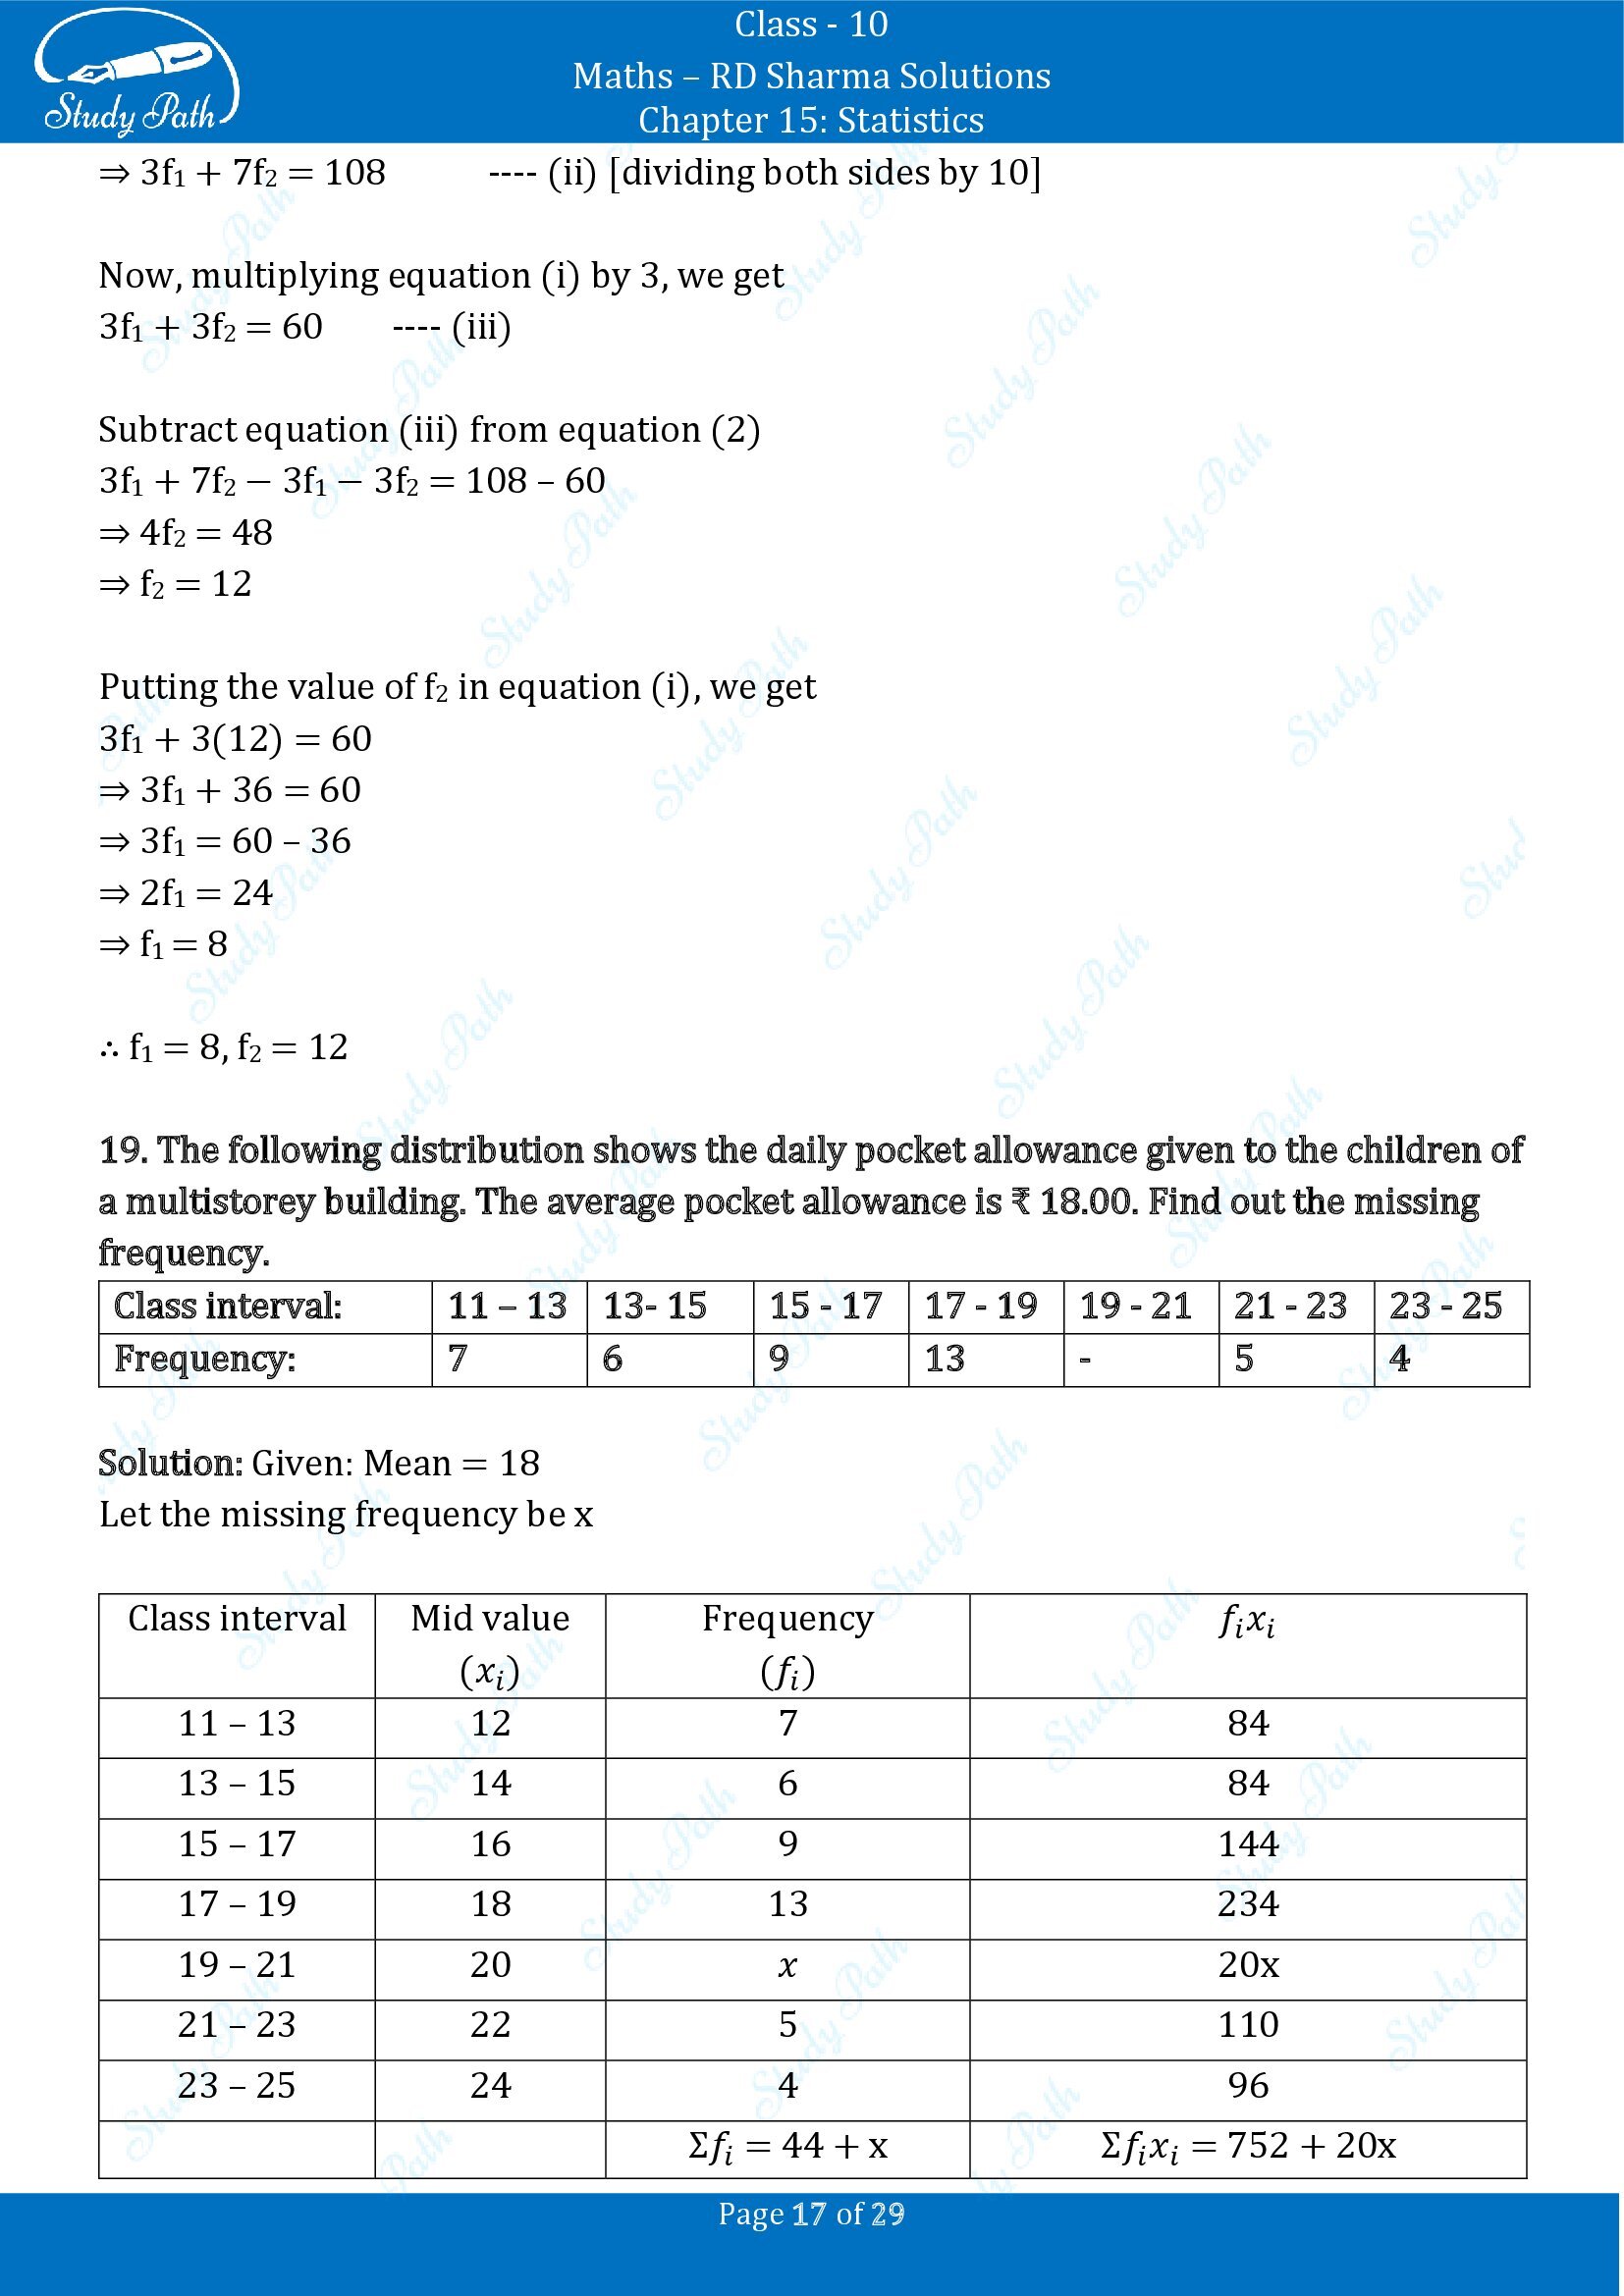 RD Sharma Solutions Class 10 Chapter 15 Statistics Exercise 15.3 0017